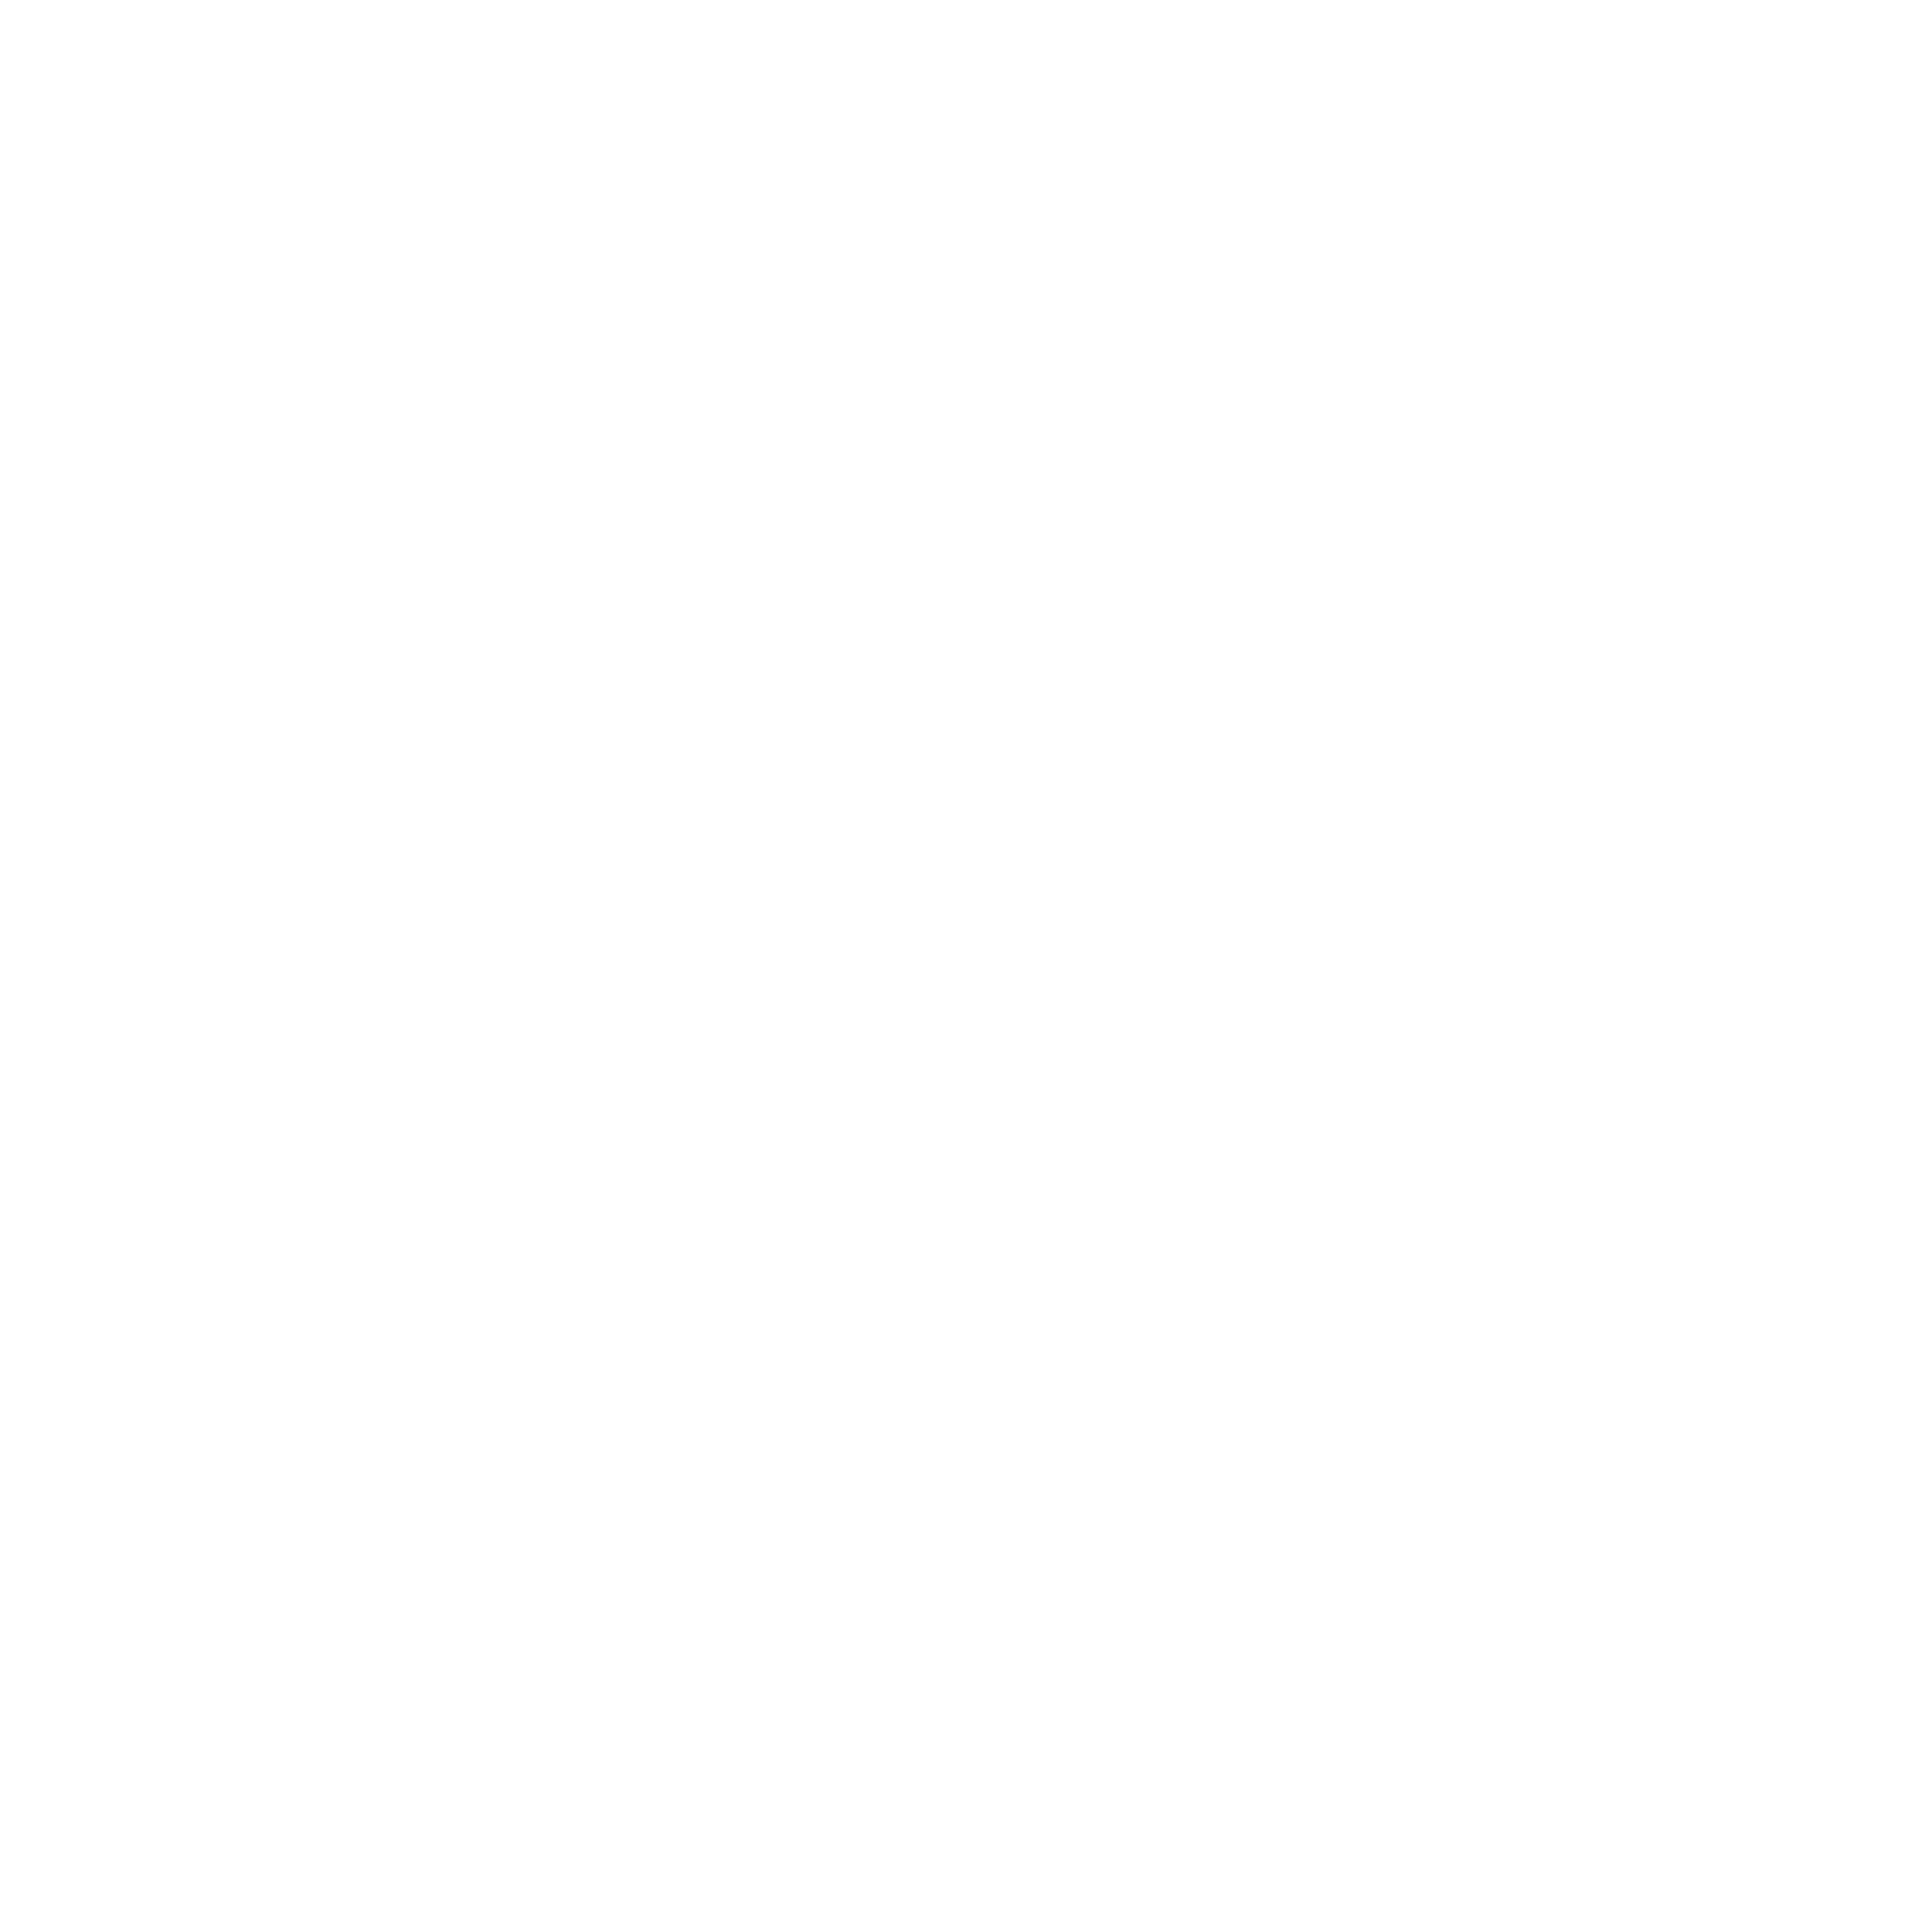 The title of the podcast 'Everybody's Trying To Find Their Way Home' is shown in big bold white, slightly worn text in the top left. The background is a gradient of a deep blue, with white stars scattered throughout, and a square white border. A stylised rocket ship is flying across the graphic, leaving a trail of stars in it's wake.